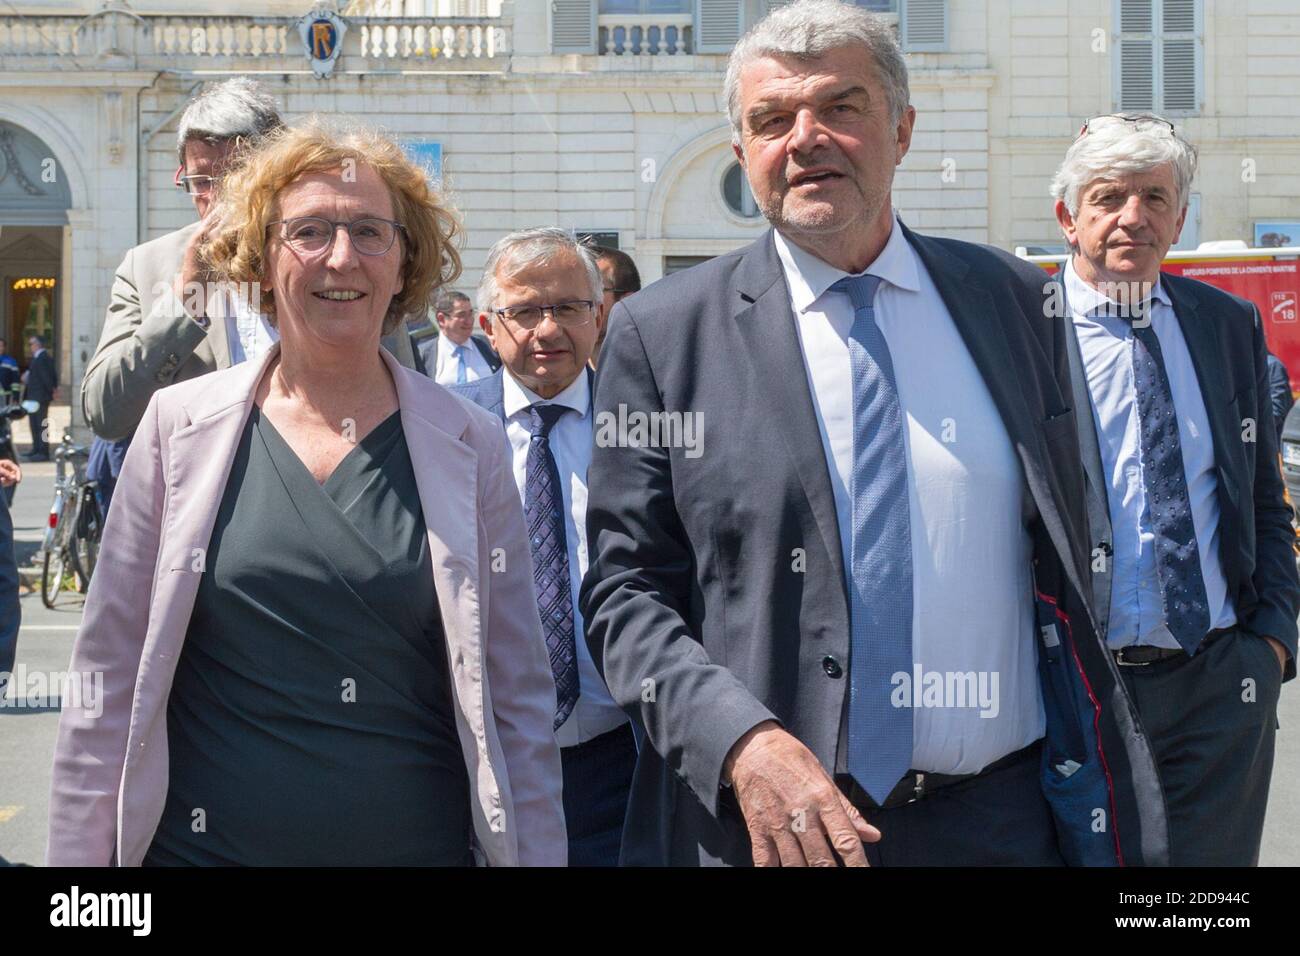 Murielle Pénicaud the french minister of work visits La Rochelle with the  mayor Jean François Fountaine on the 4th may 2018. Photo by Arnault  Serrière / ABACAPRESS.COM Stock Photo - Alamy